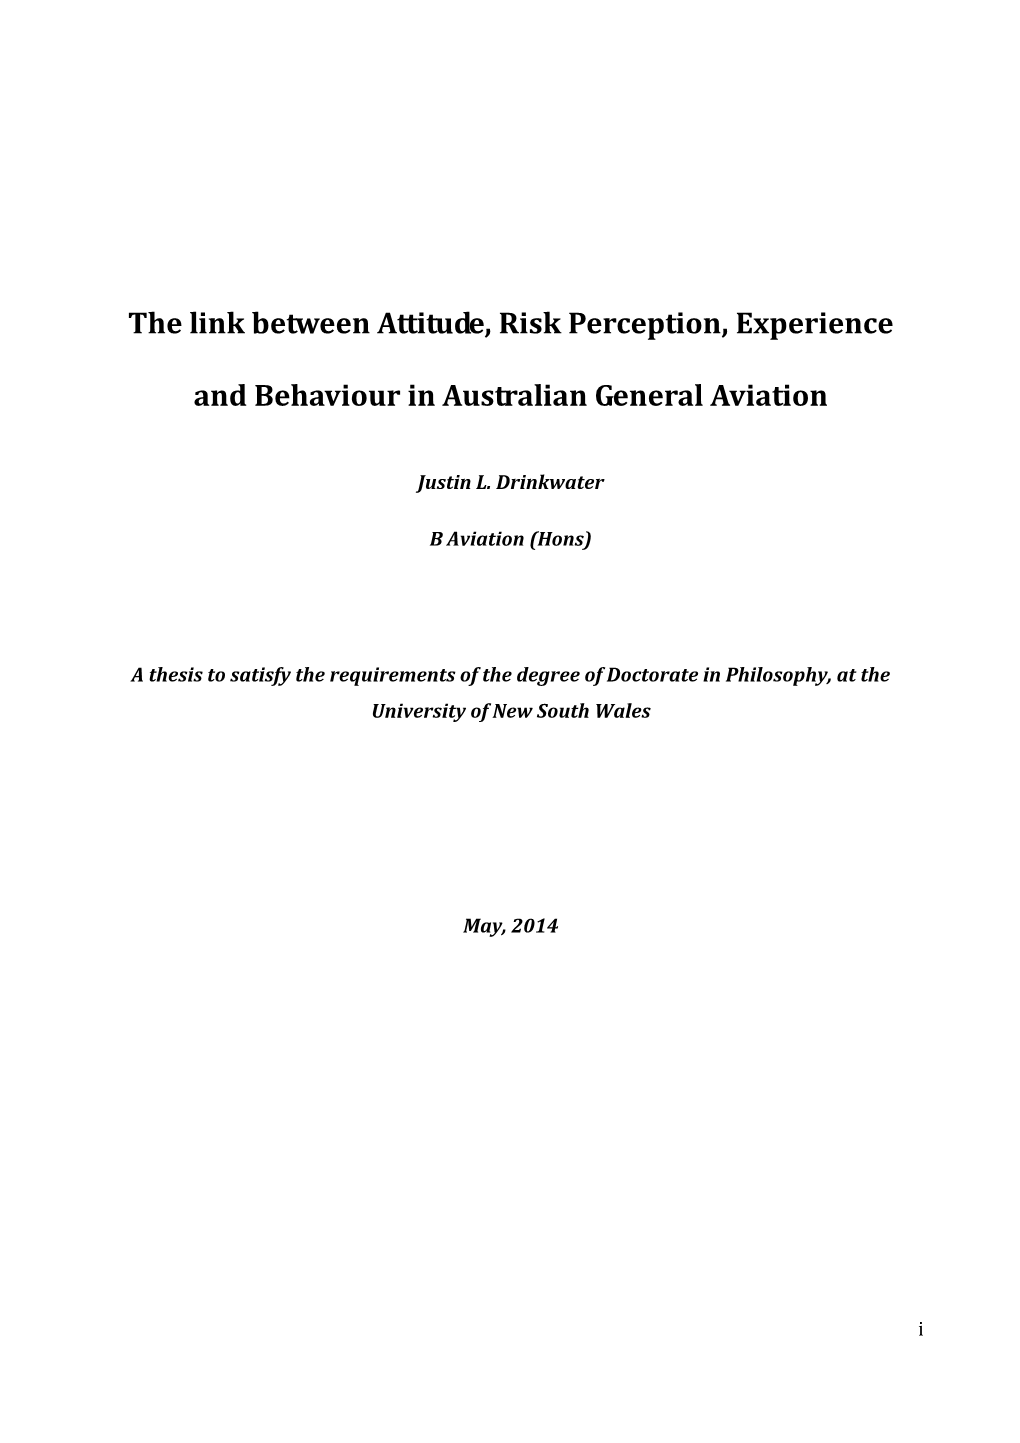 The Link Between Attitude, Risk Perception, Experience and Behaviour in Australian General Aviation